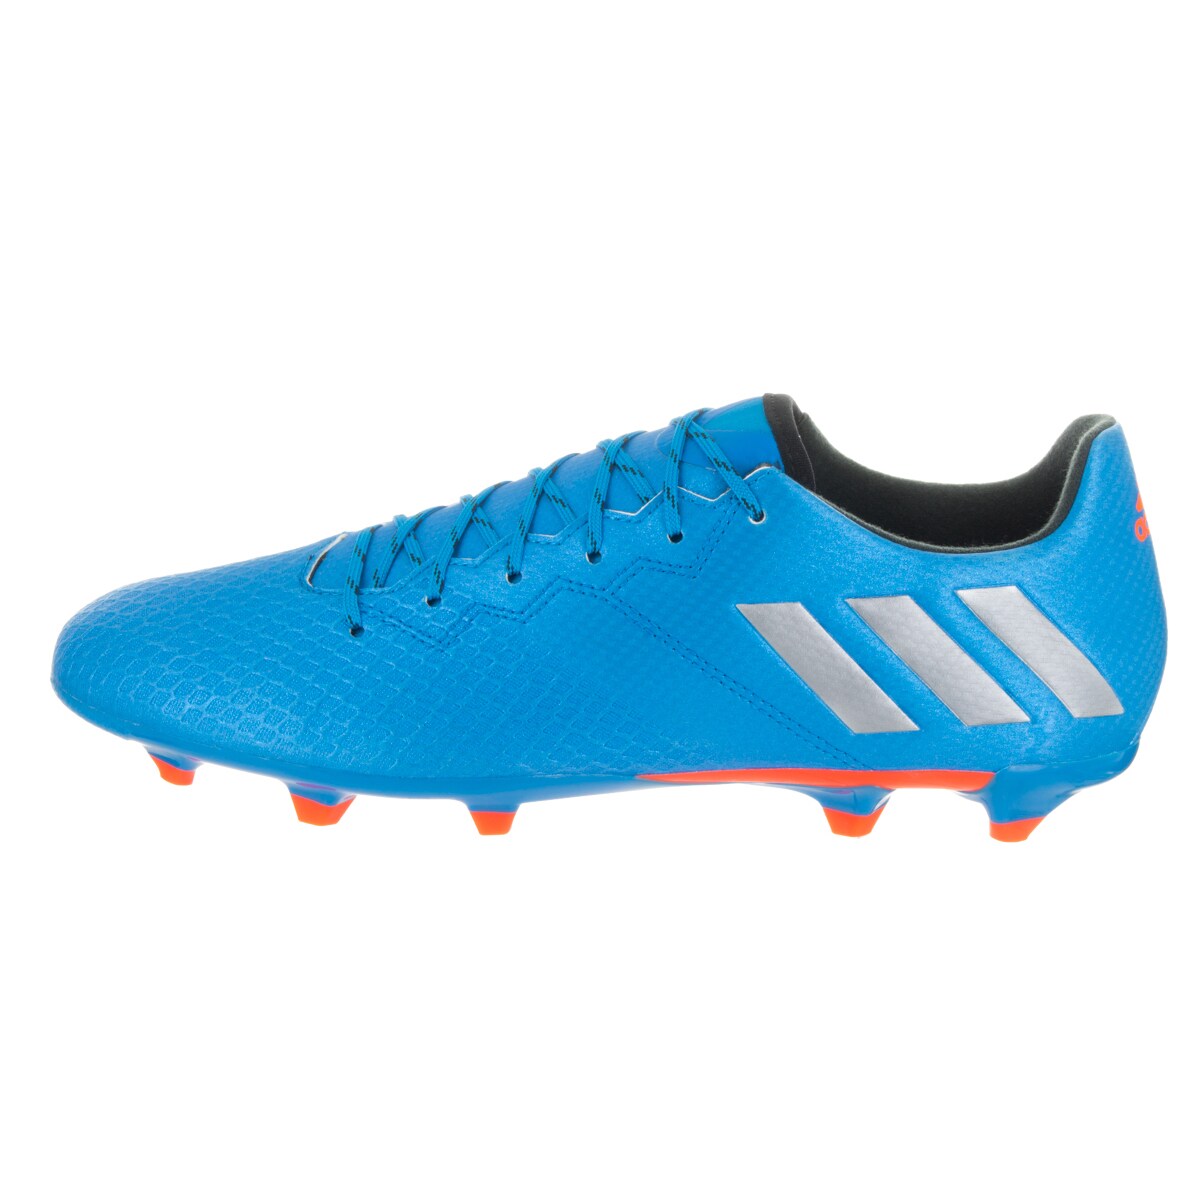 adidas messi 16.3 fg soccer cleats